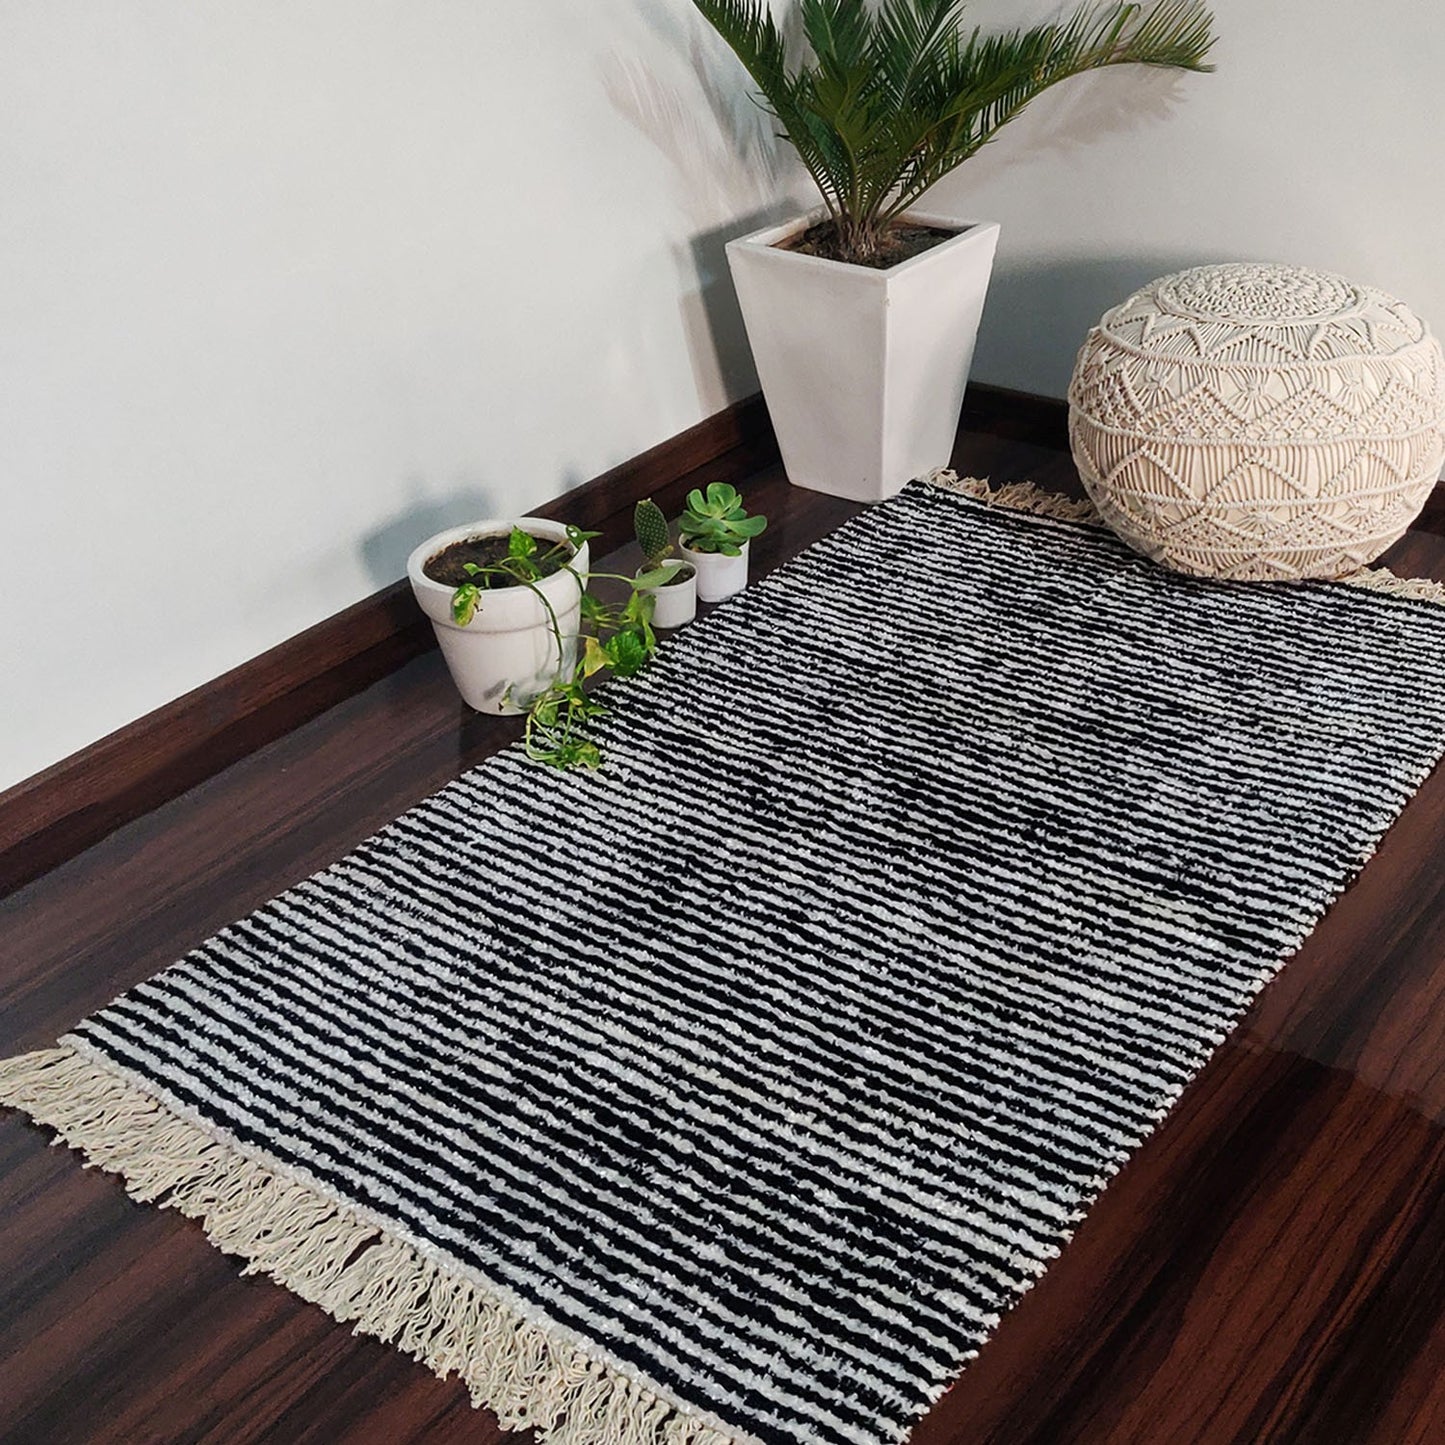 Value Deal-Avioni Carpet For Living Room Lux Collection- Modern Black And White